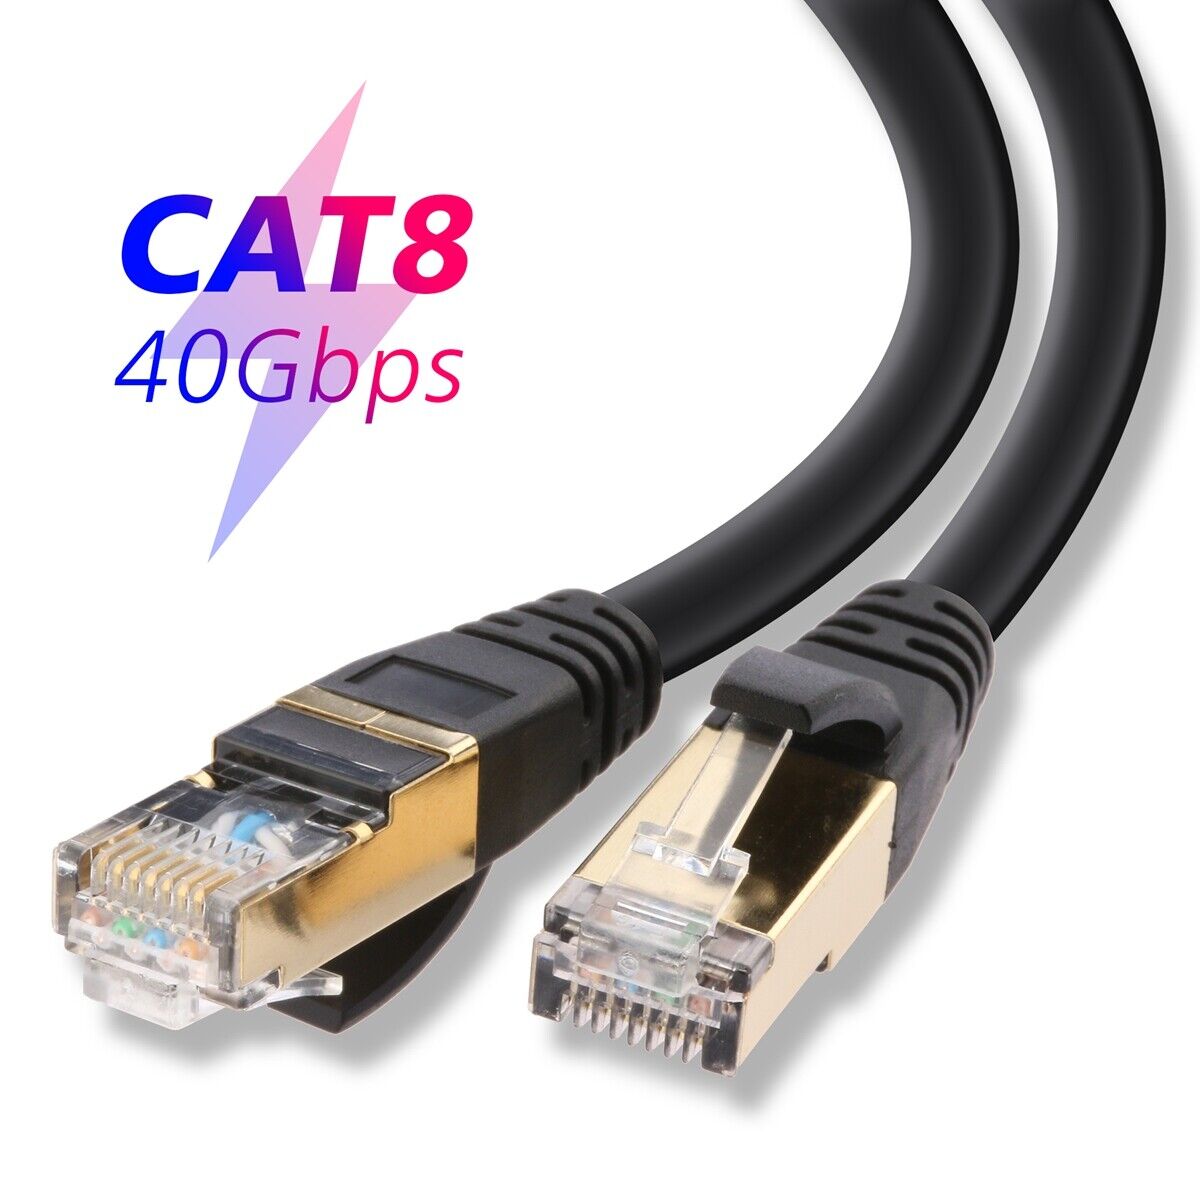 CAT8 Ethernet LAN Patch Cable 10ft with 2000 Mbps (2Gbps) HighSpeed - 2 pack Lot